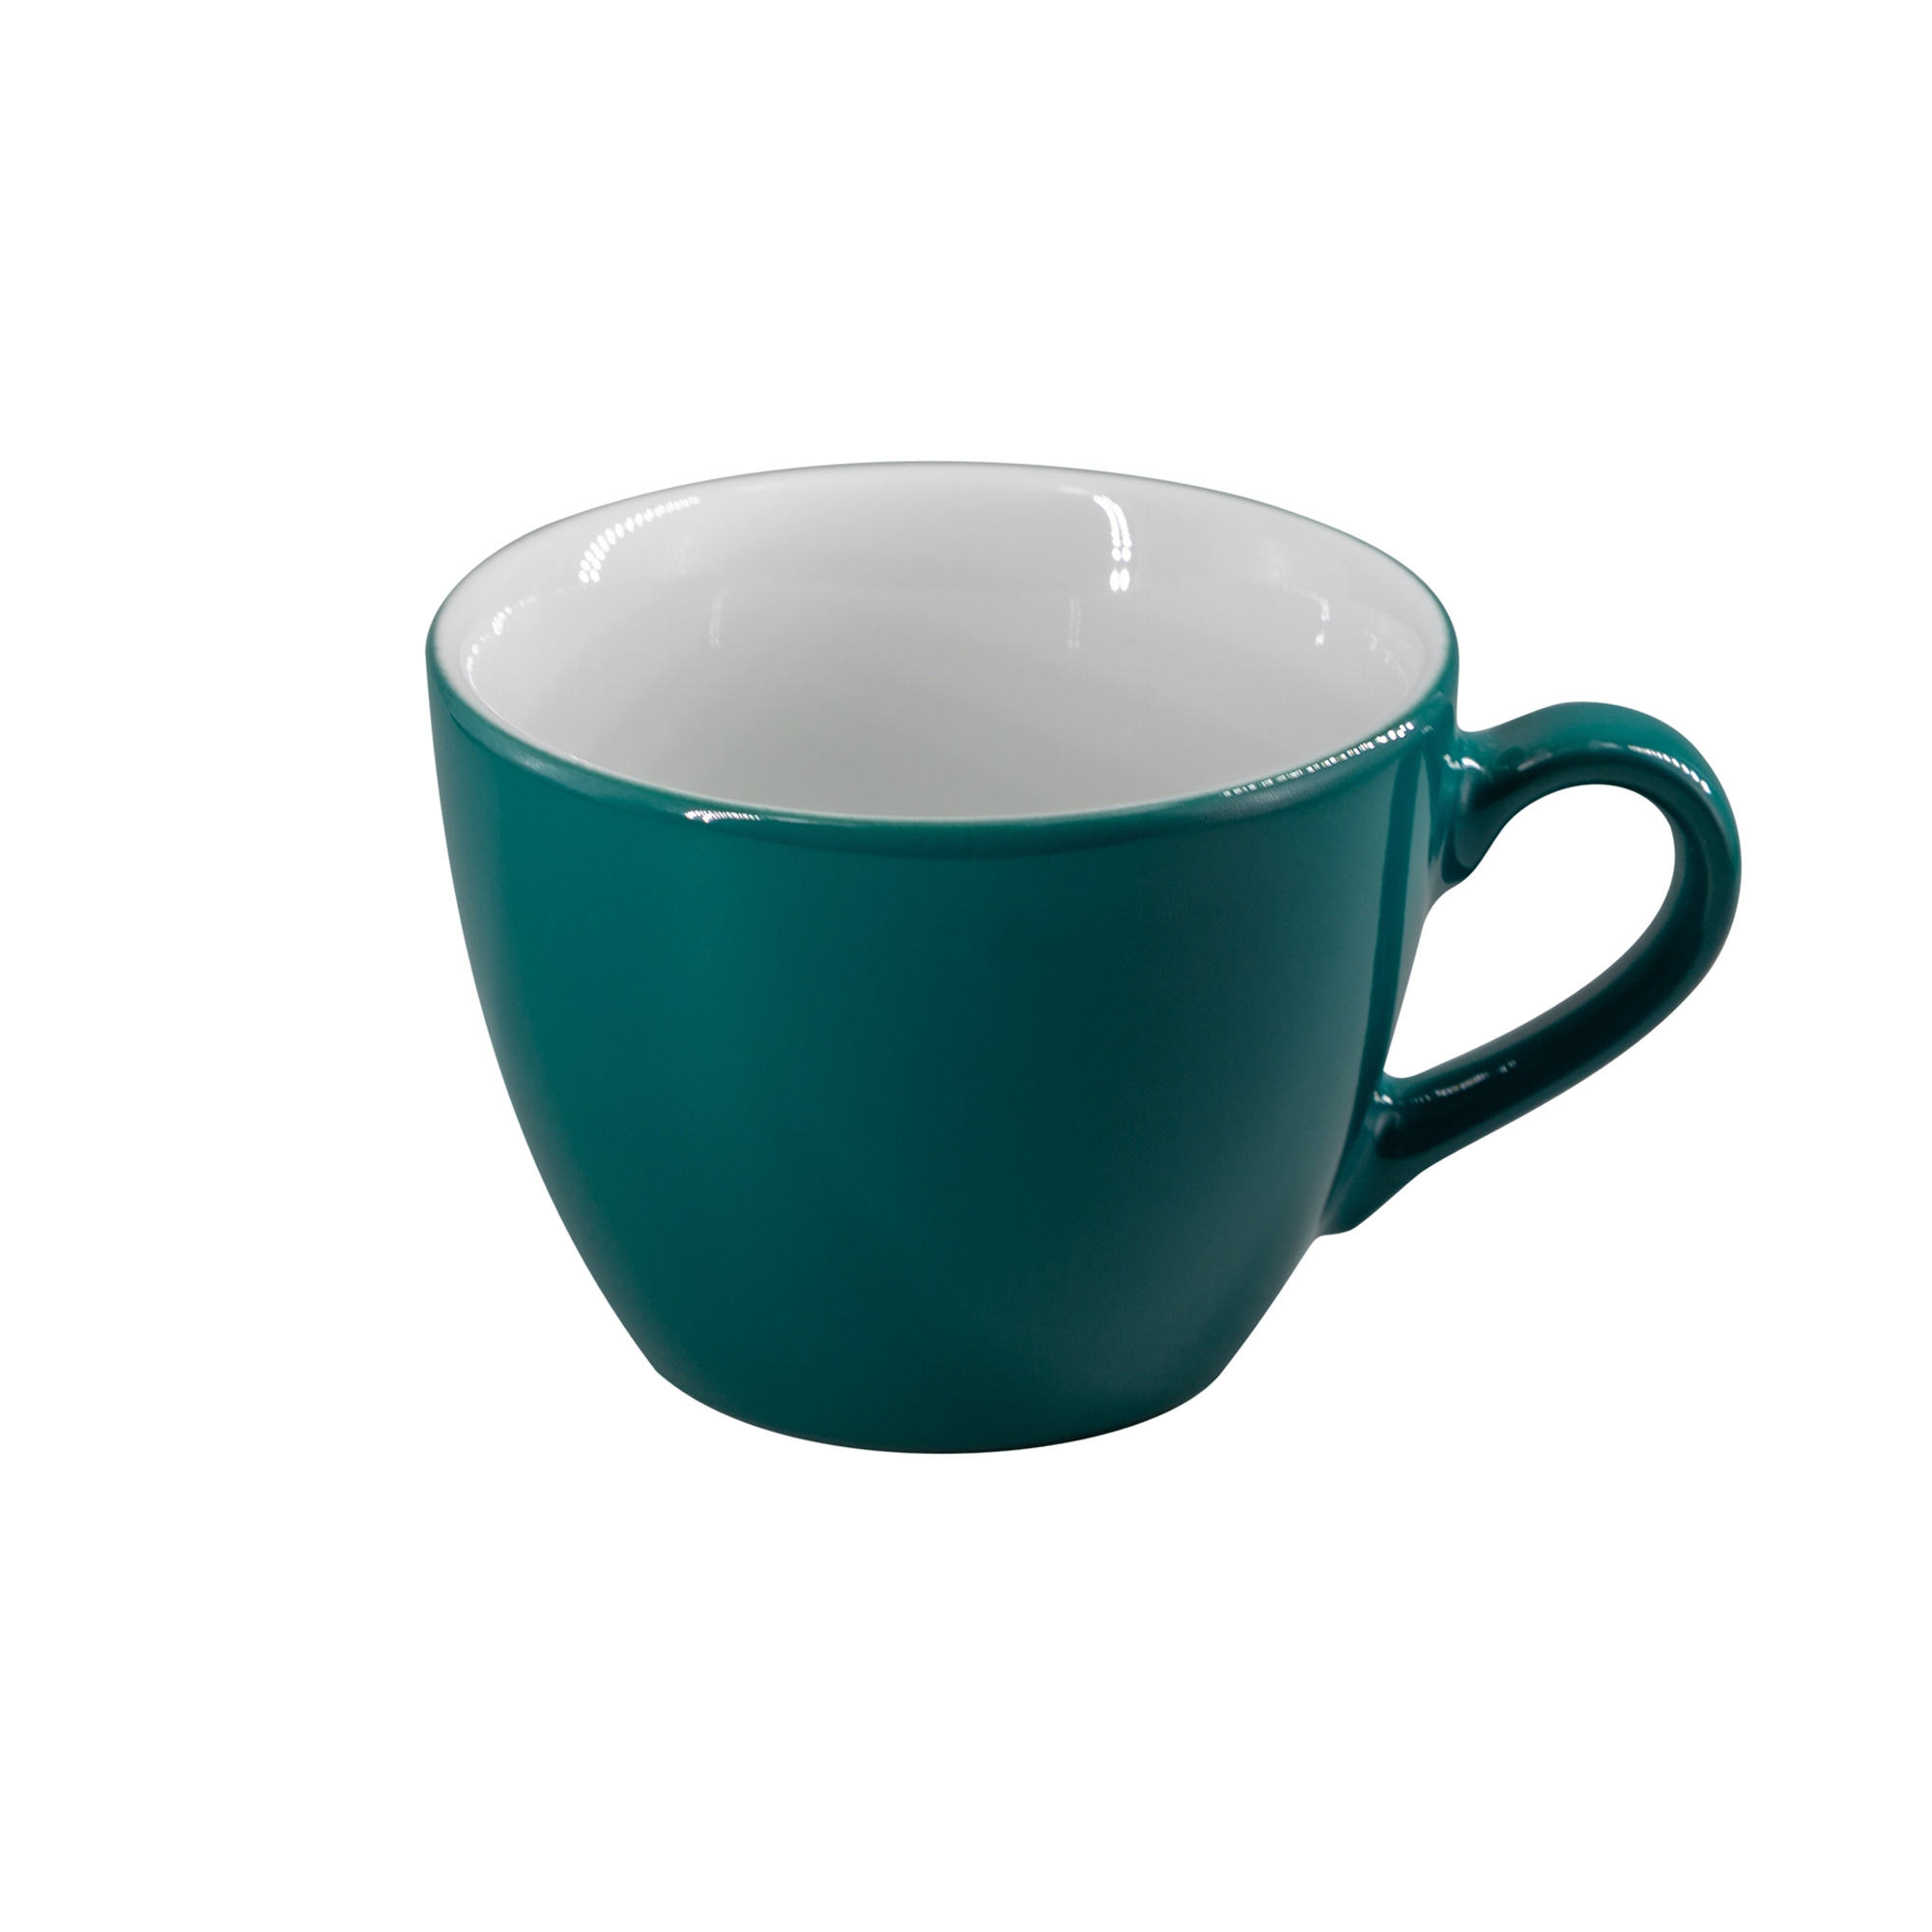 Eschenbach - cup 0.21 l - turquoise green